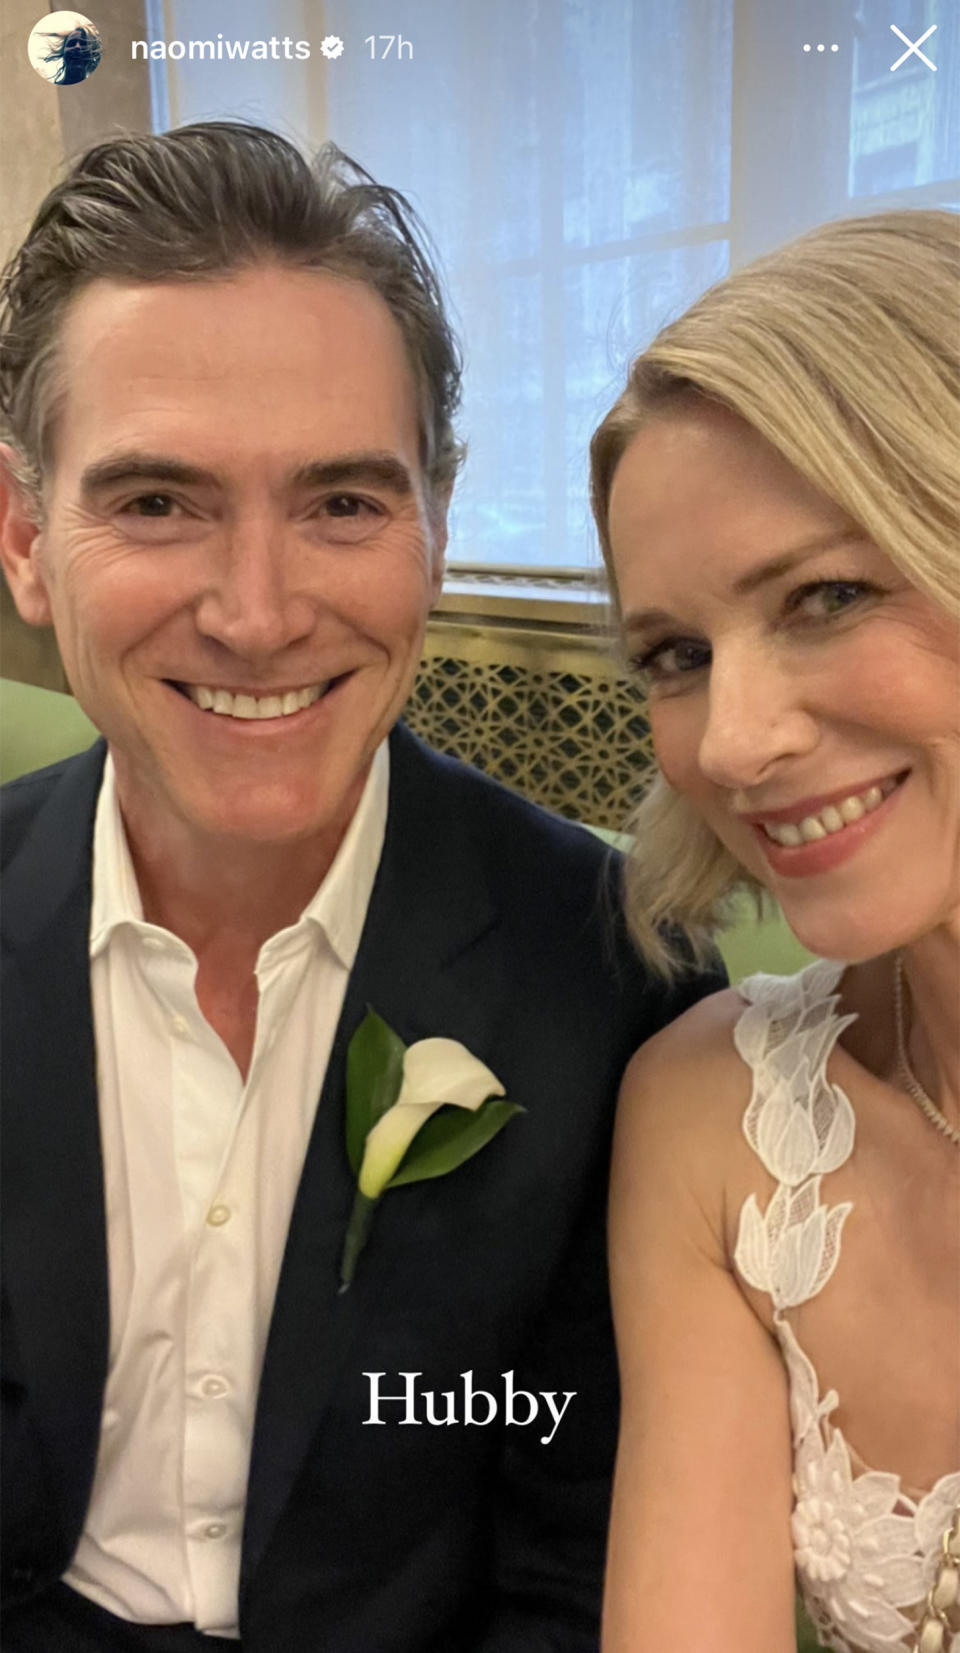 The first public selfie from the newlyweds! (Naomi Watts / Instagram)